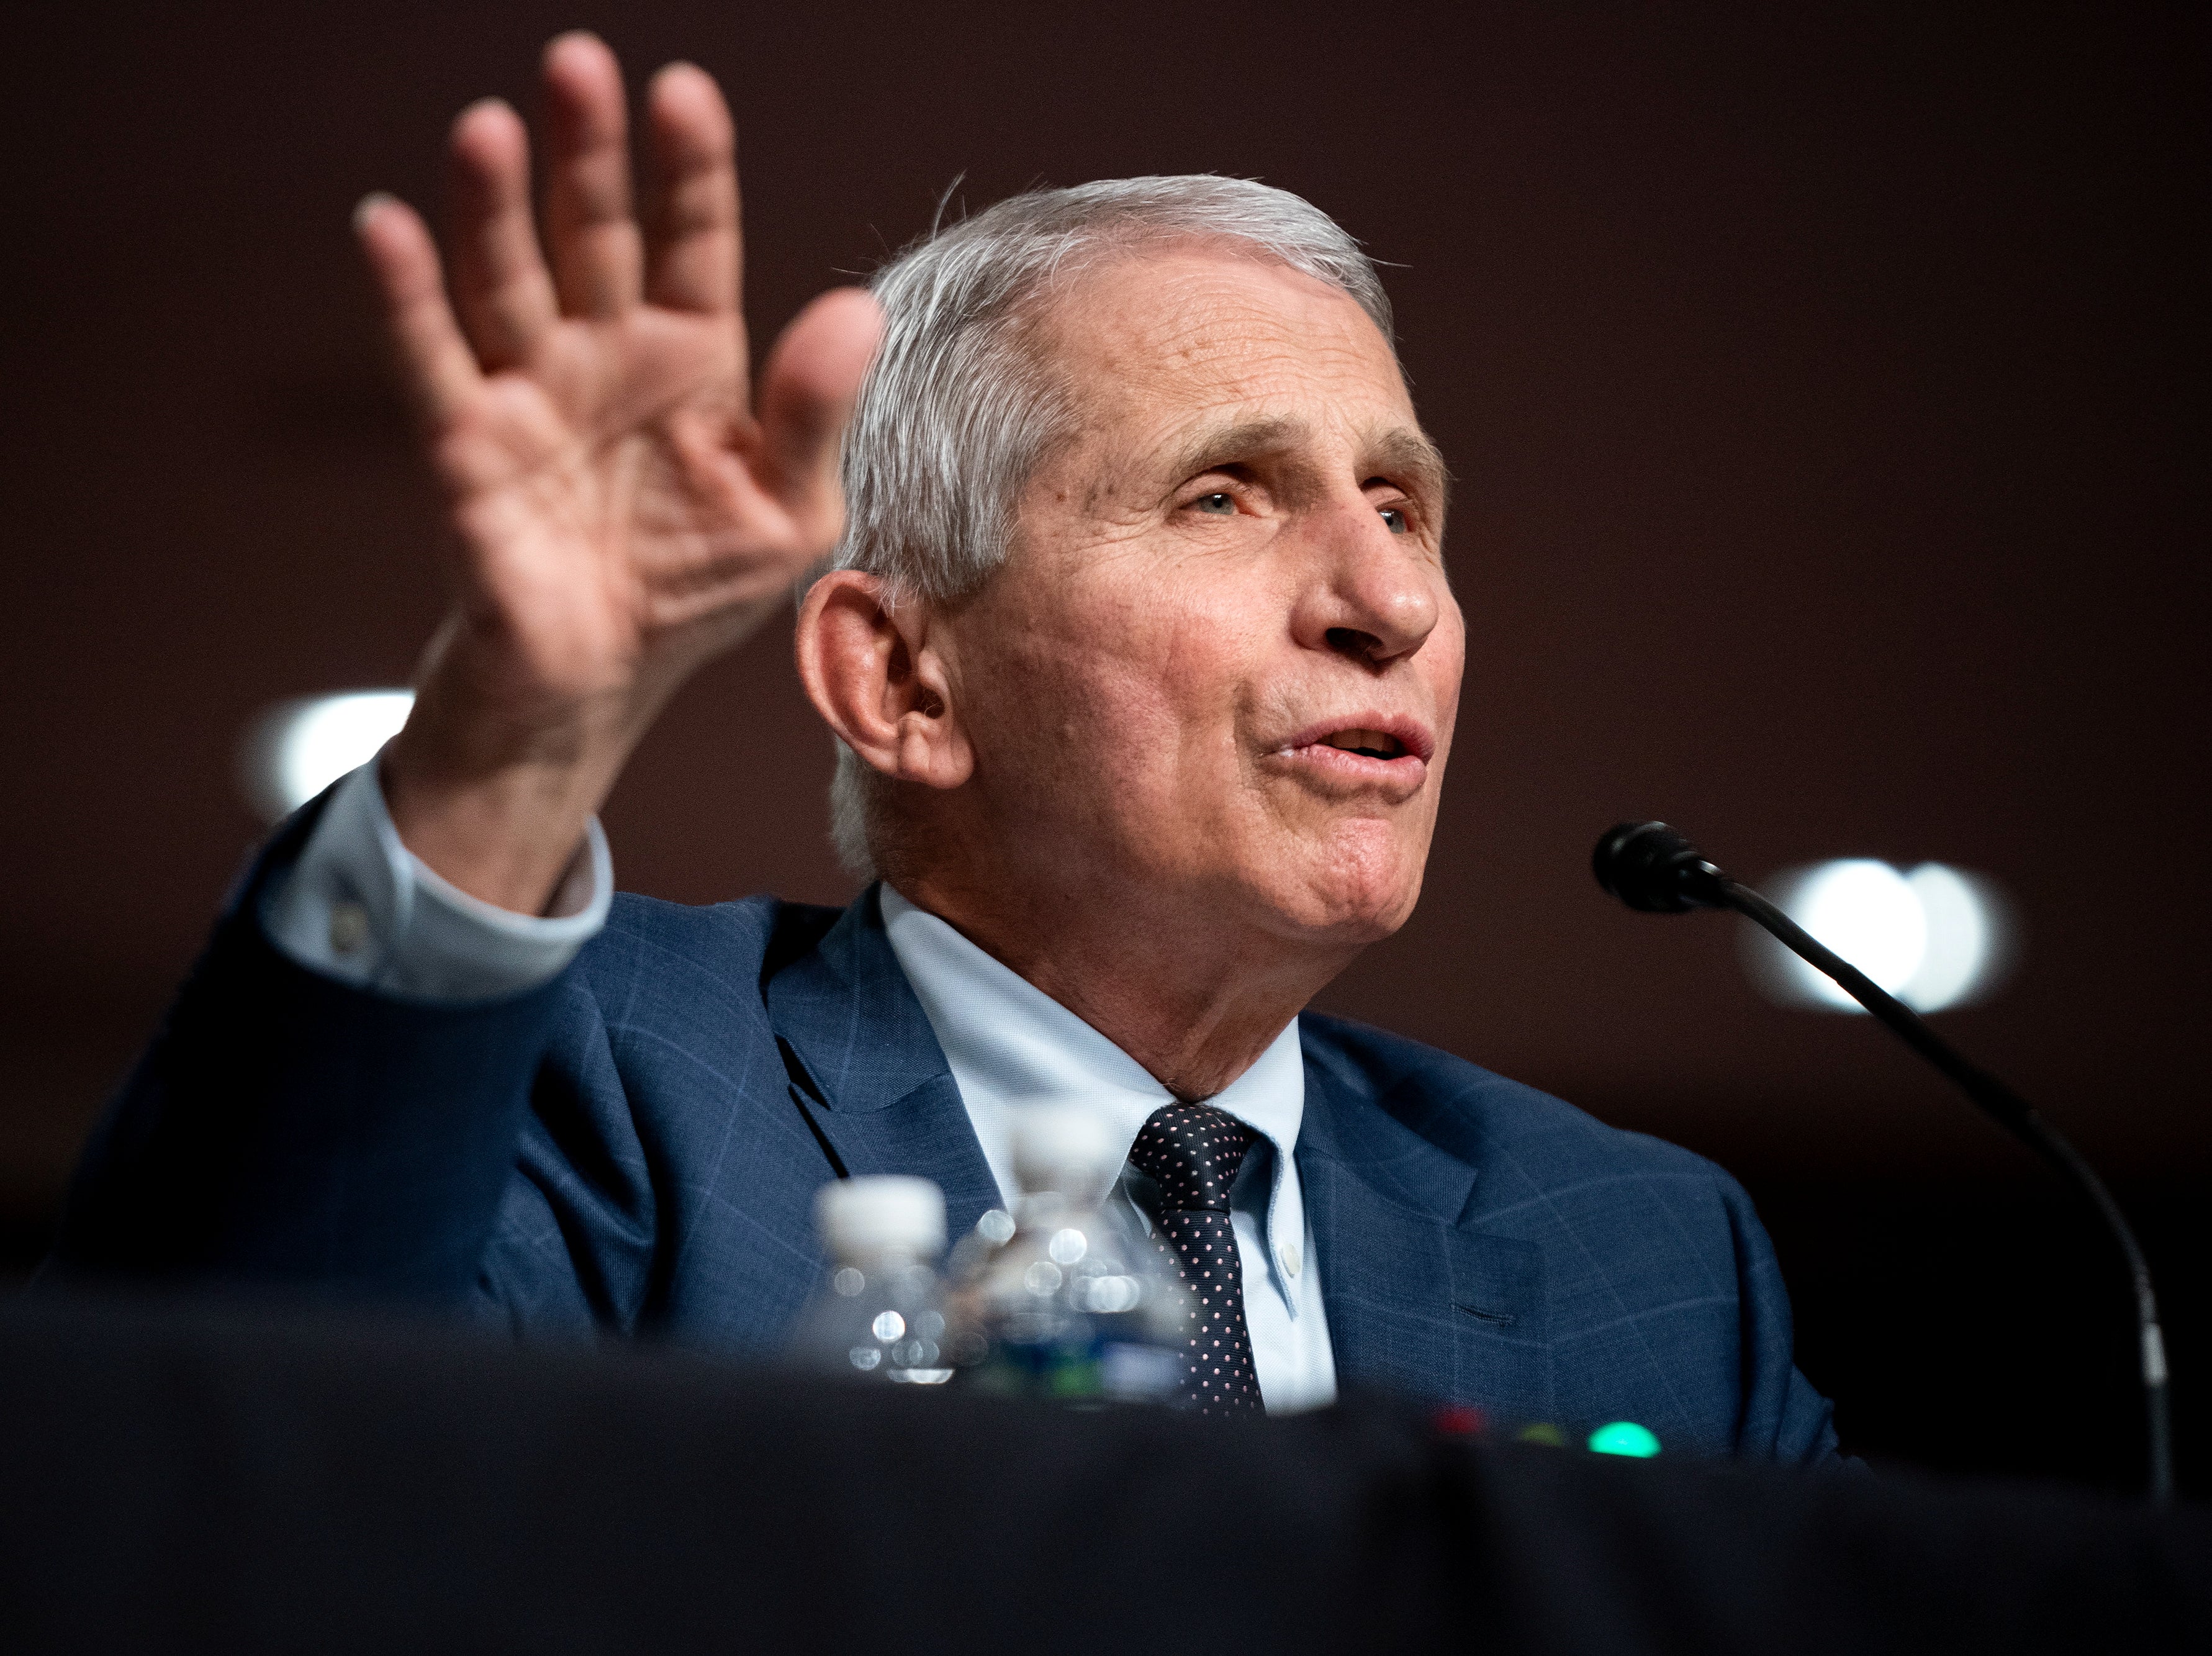 Fauci was exasperated at the lack of knowledge displayed by a senator